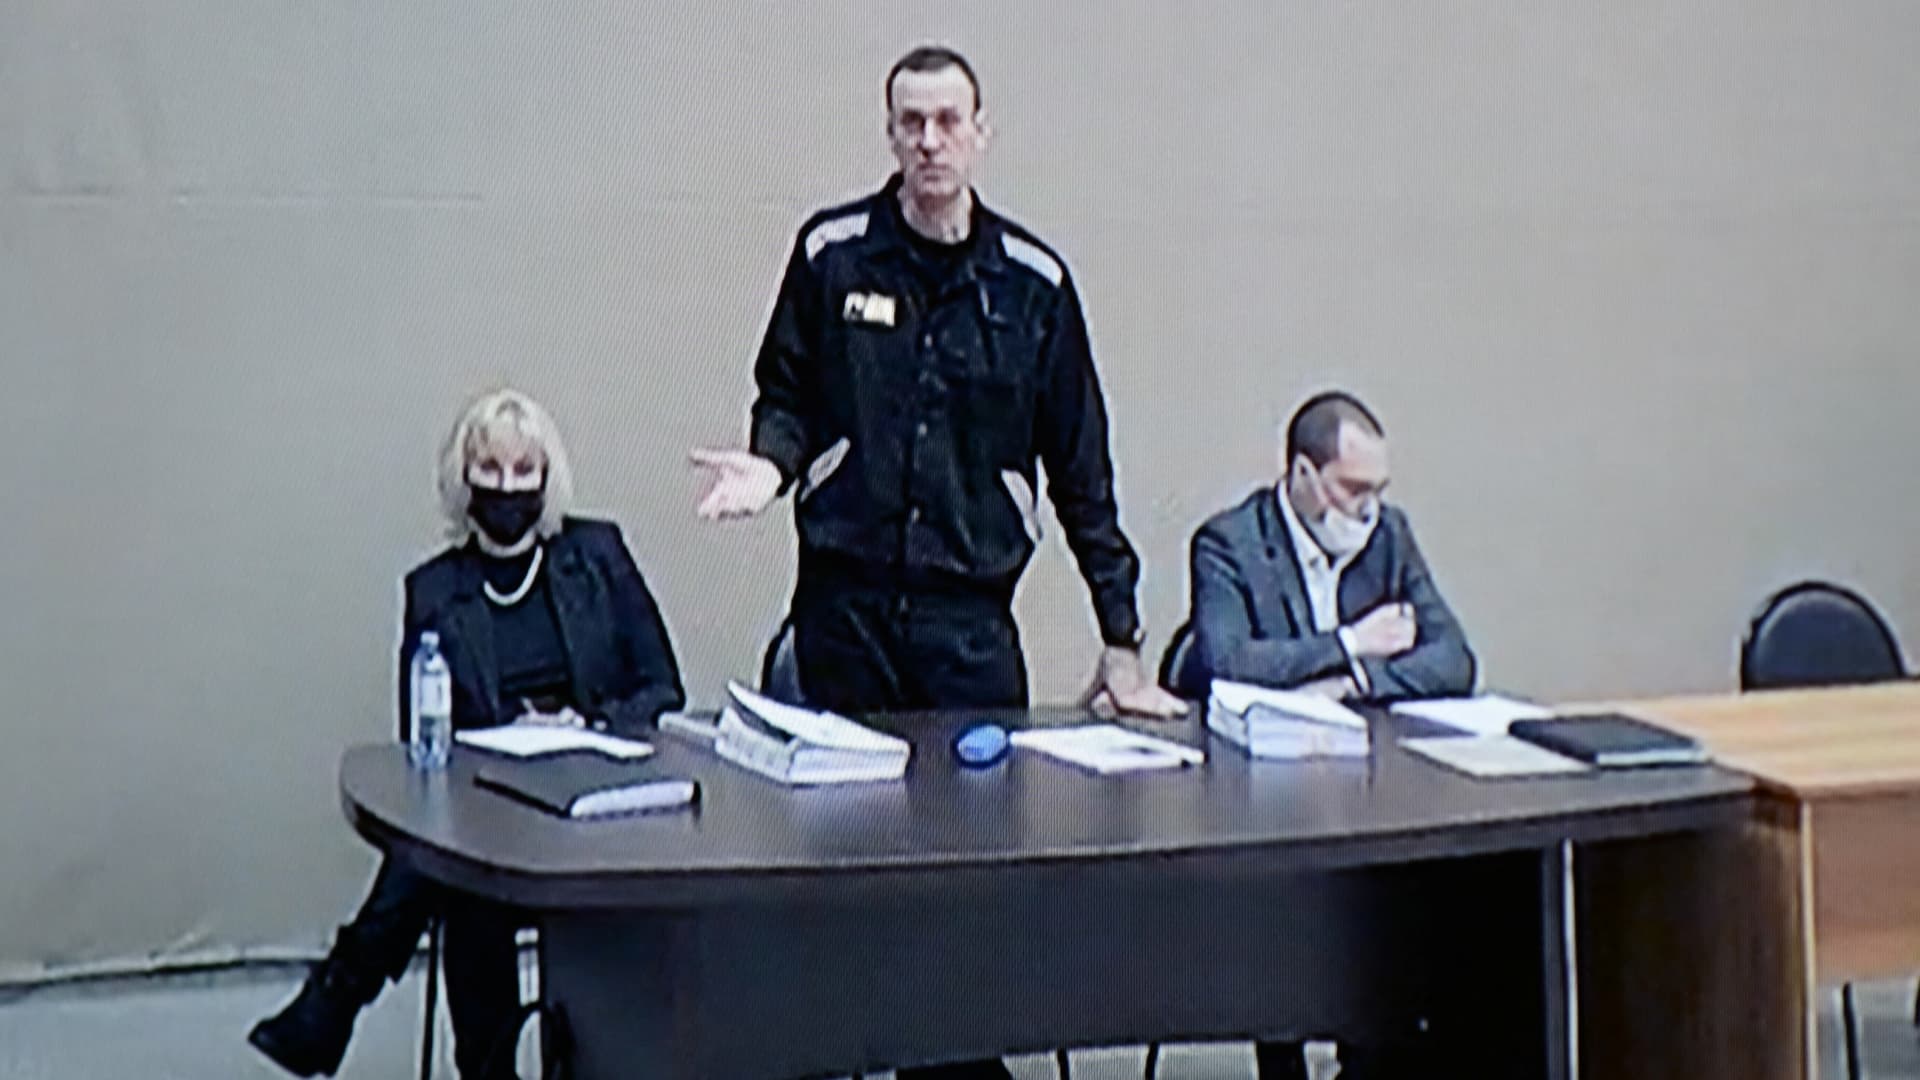 Russian opposition leader Alexei Navalny, lawyers Olga Mikhailova and Vadim Kobzev are seen on a screen via a video link during a court hearing at the IK-2 male correctional facility, in the town of Pokrov in Vladimir Region, Russia February 15, 2022.